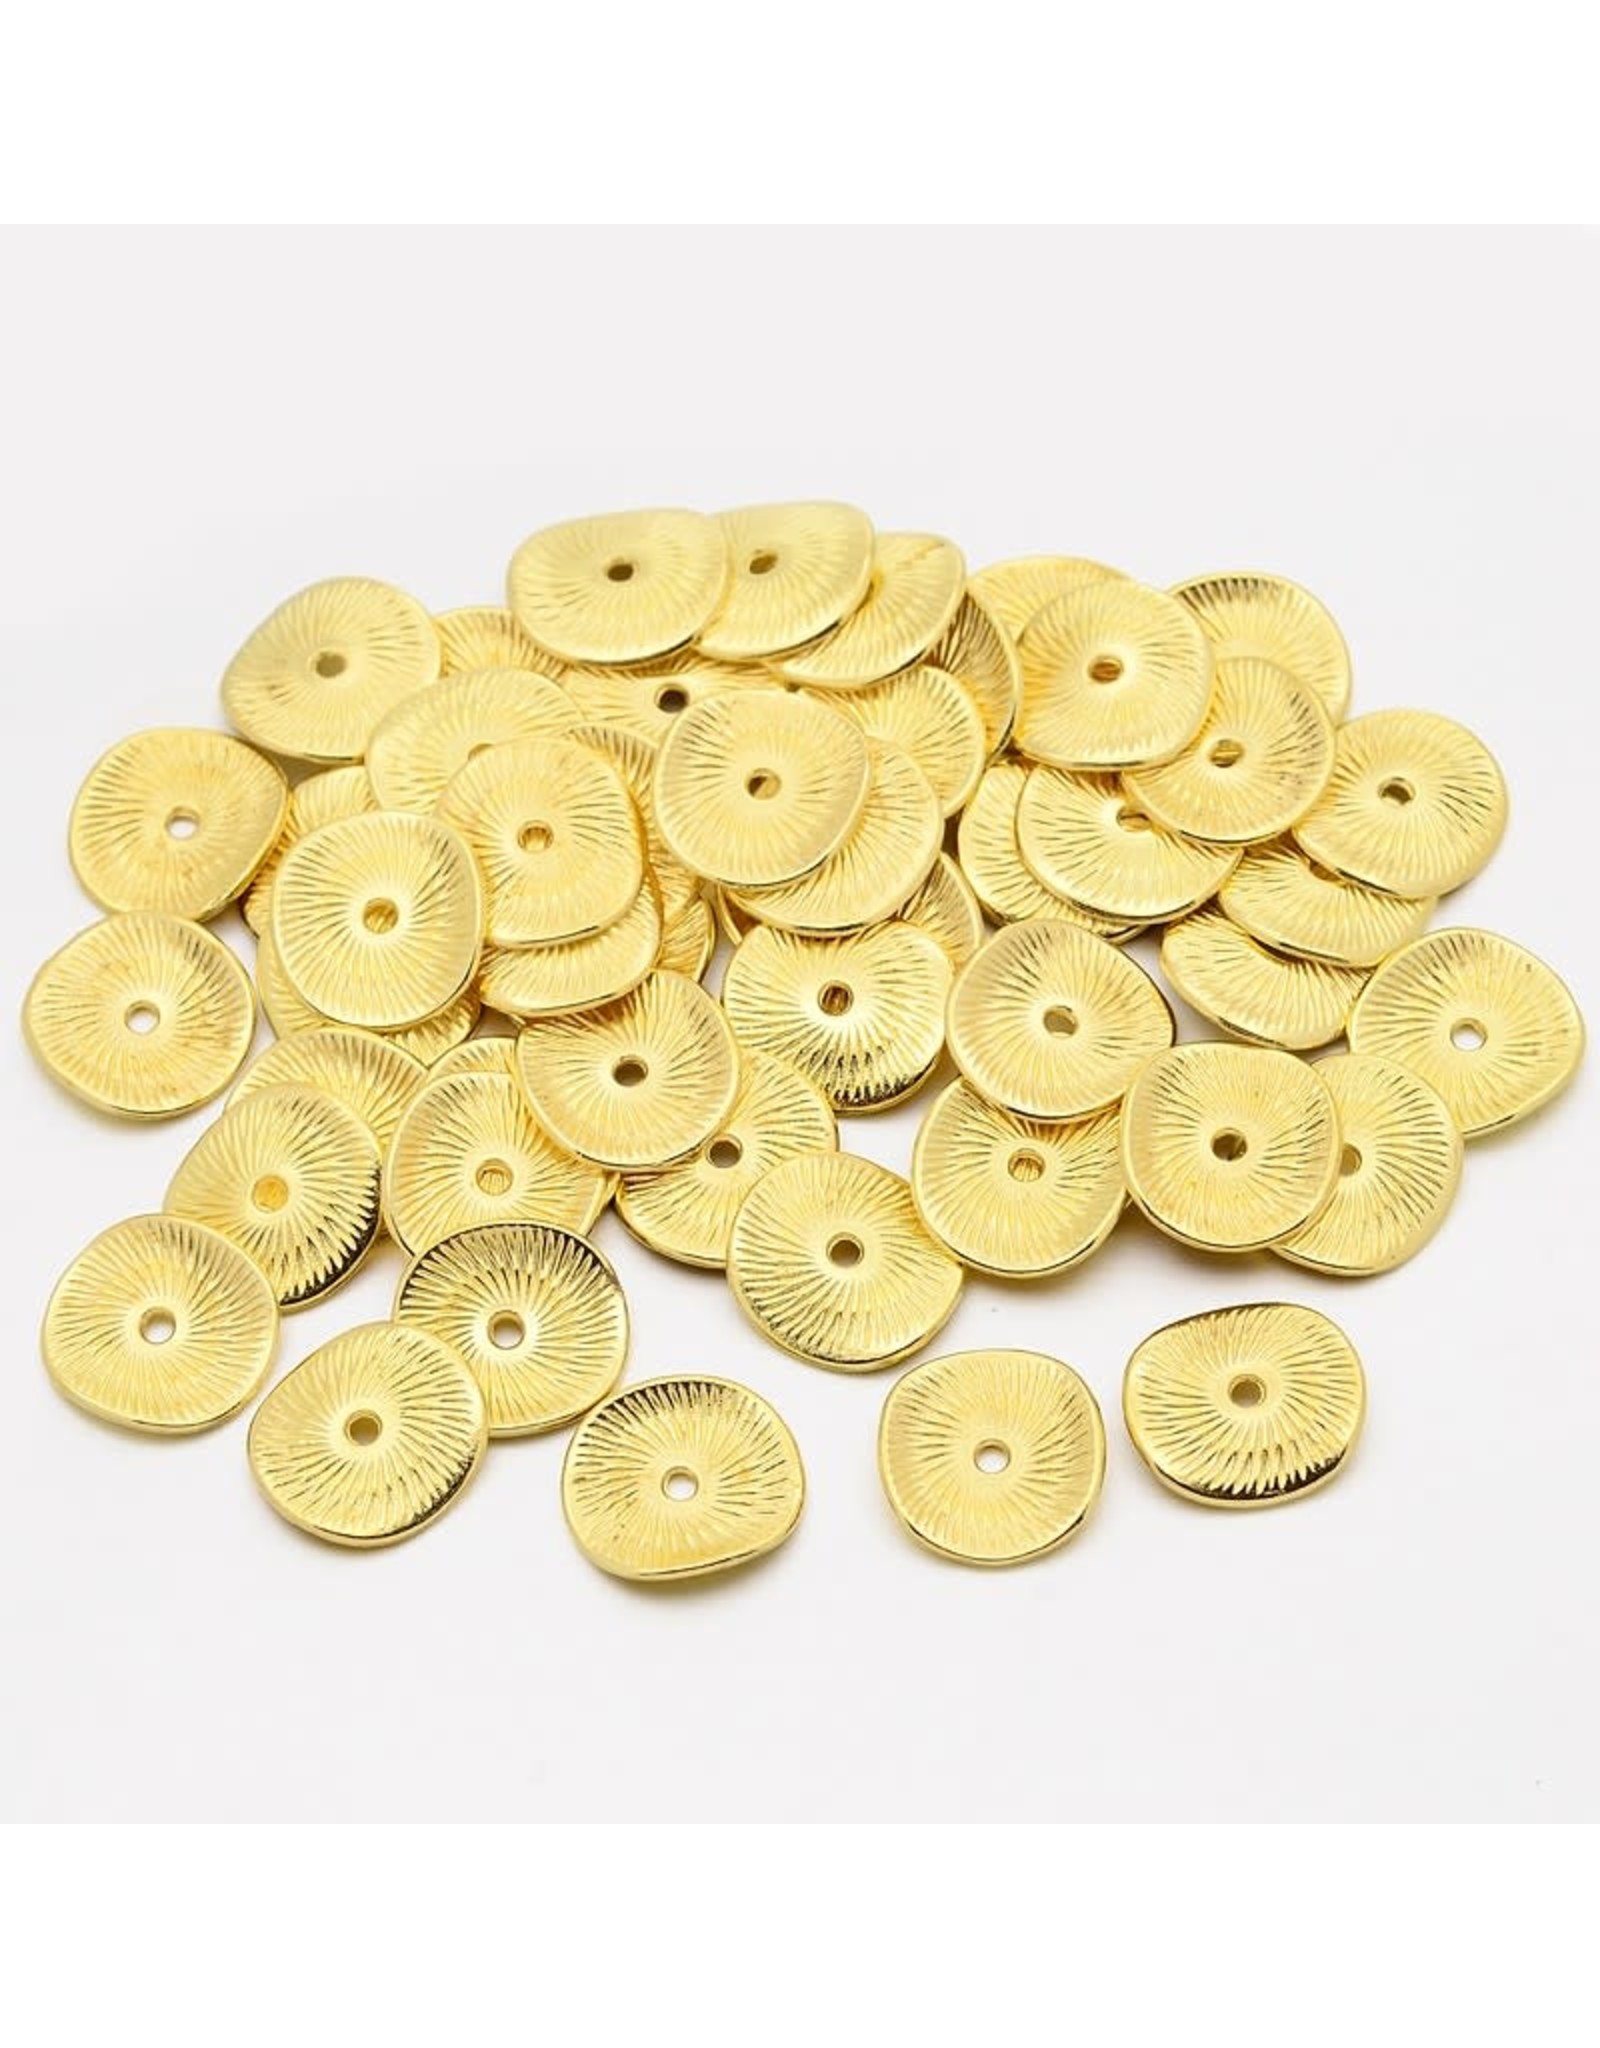 Wavy Spacer Bead  Antique Gold 15mm  x25